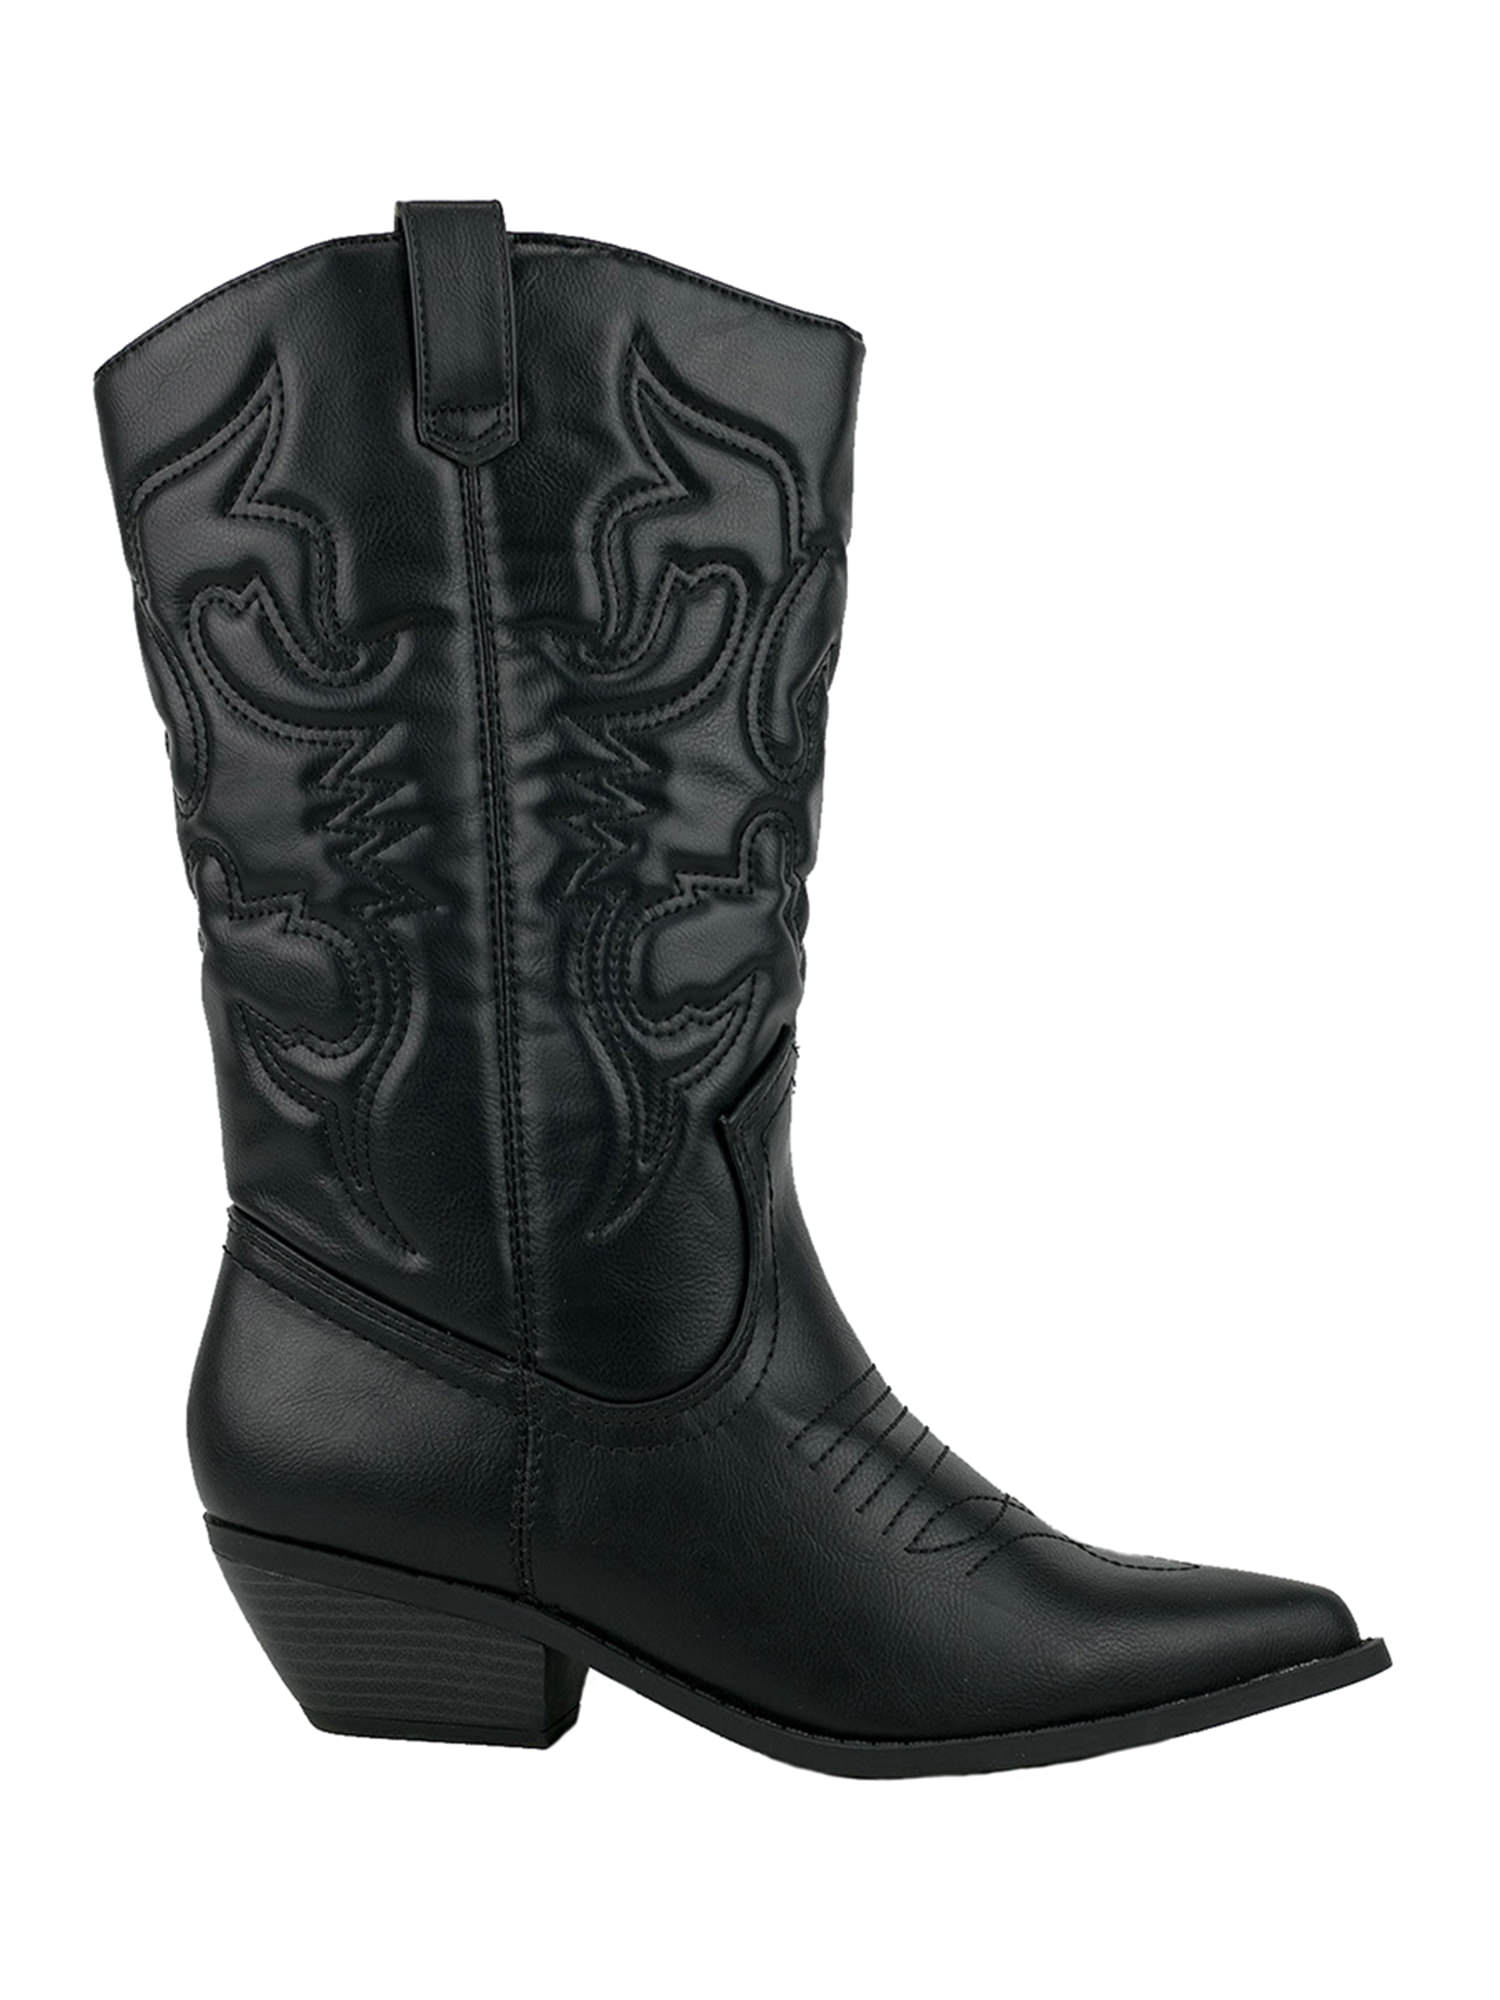 Reno Black Soda Cowboy Western Stitched Boots Women Cowgirl Boots Pointy Toe Knee High - image 3 of 3